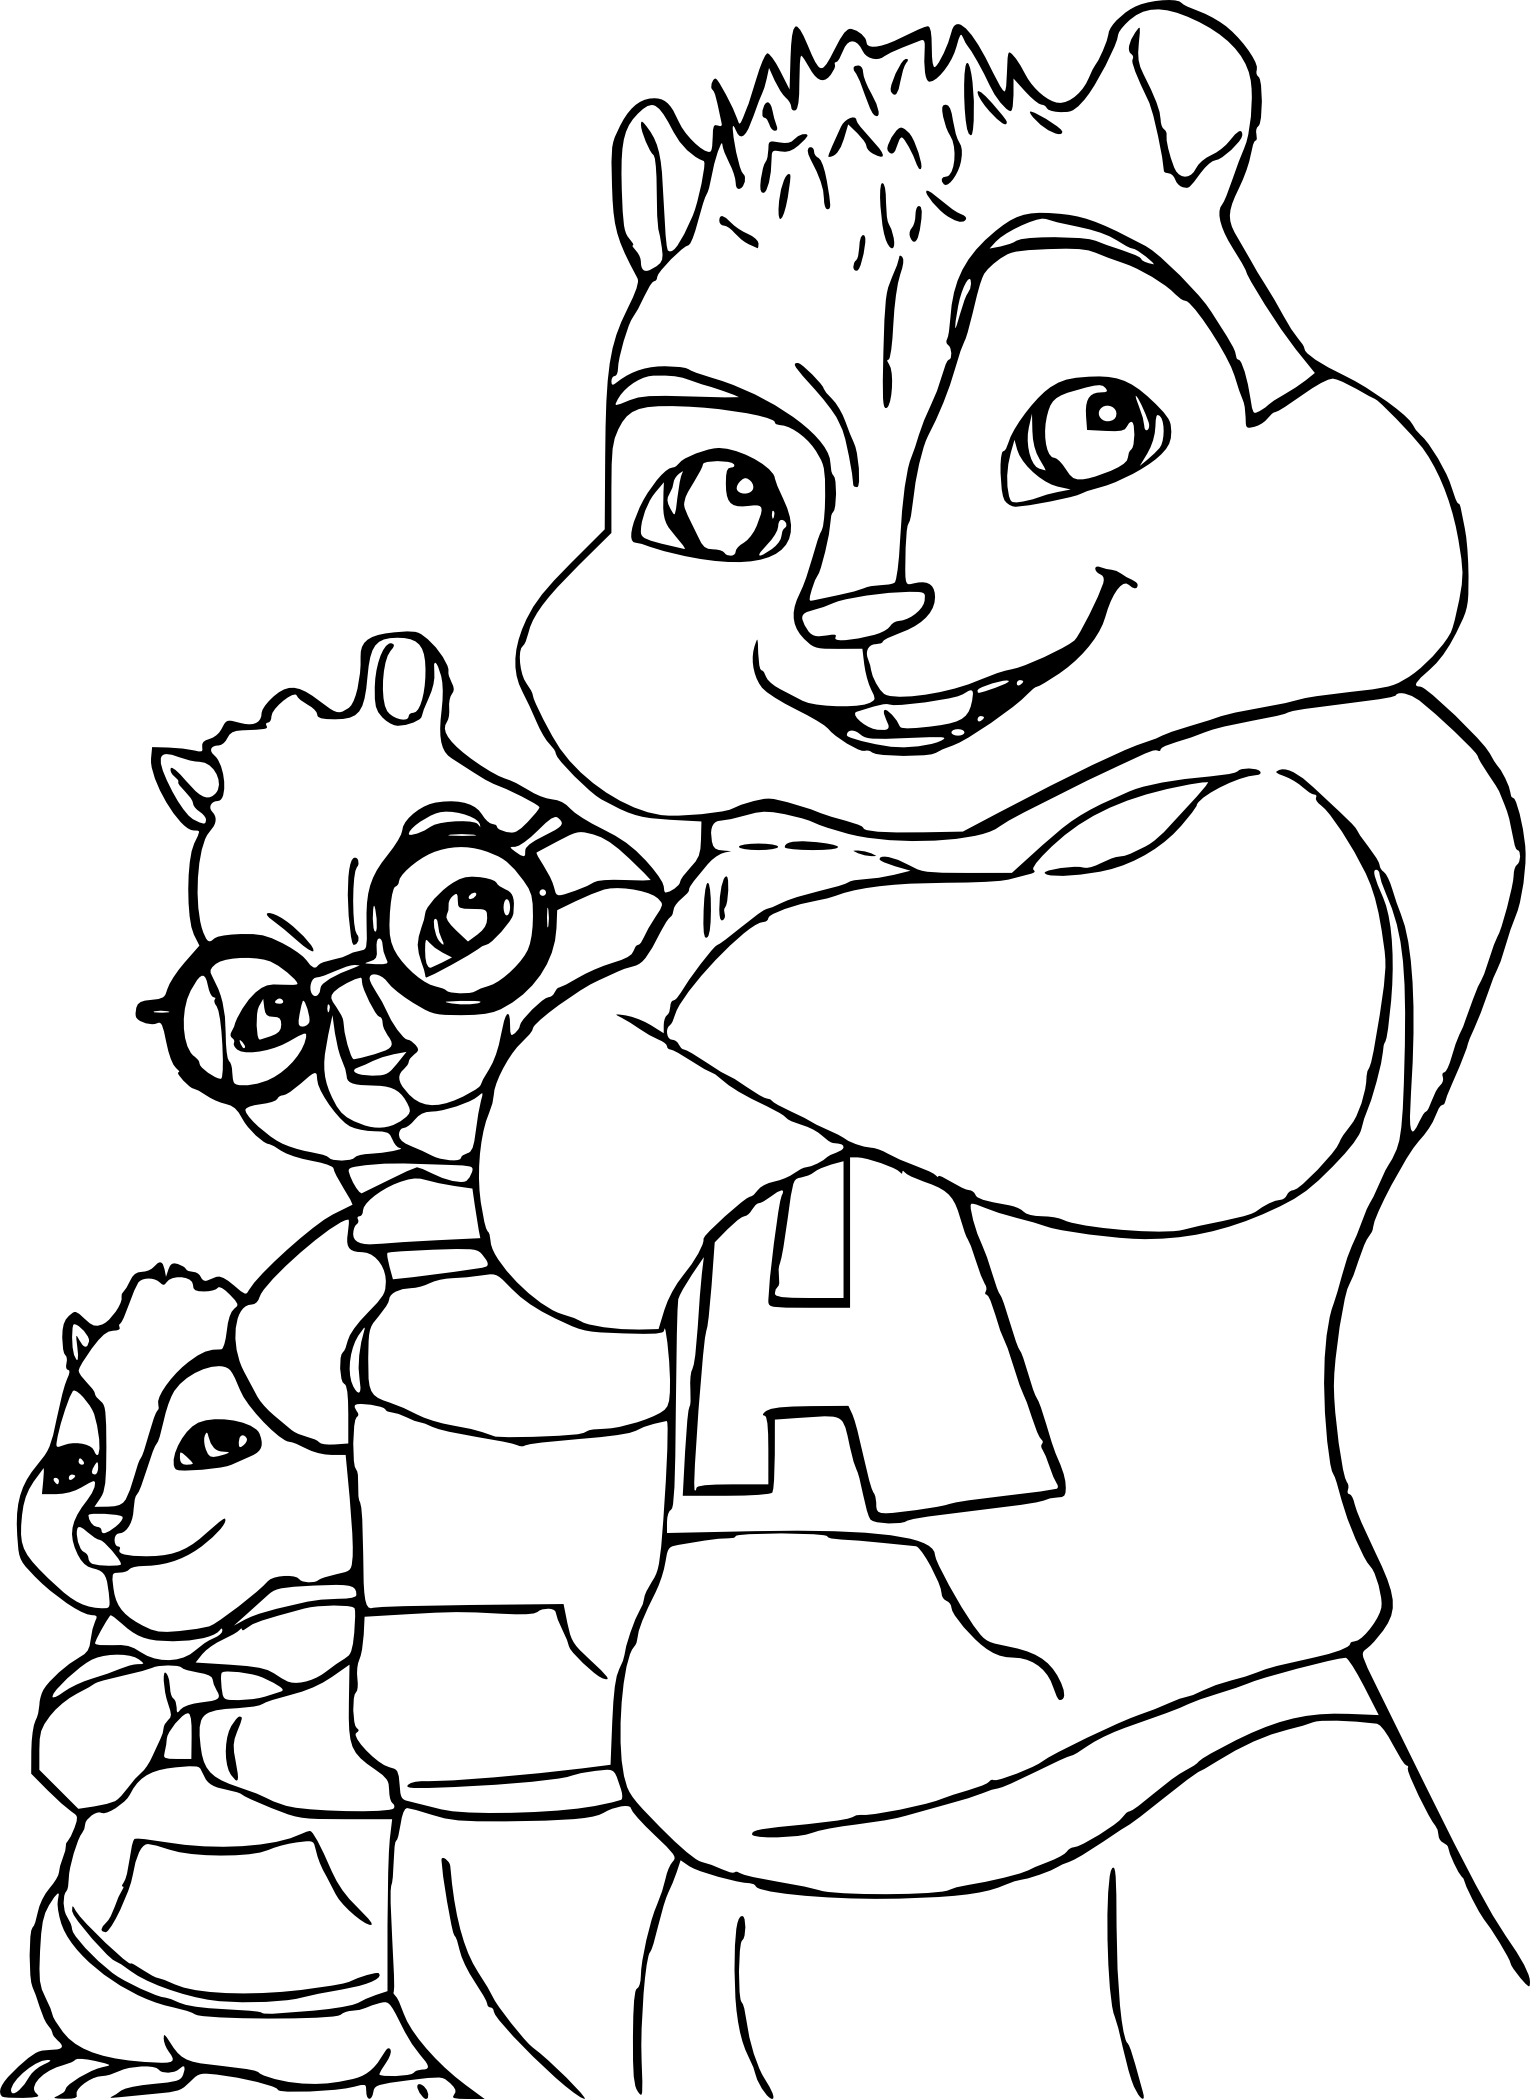 Alvin coloring page